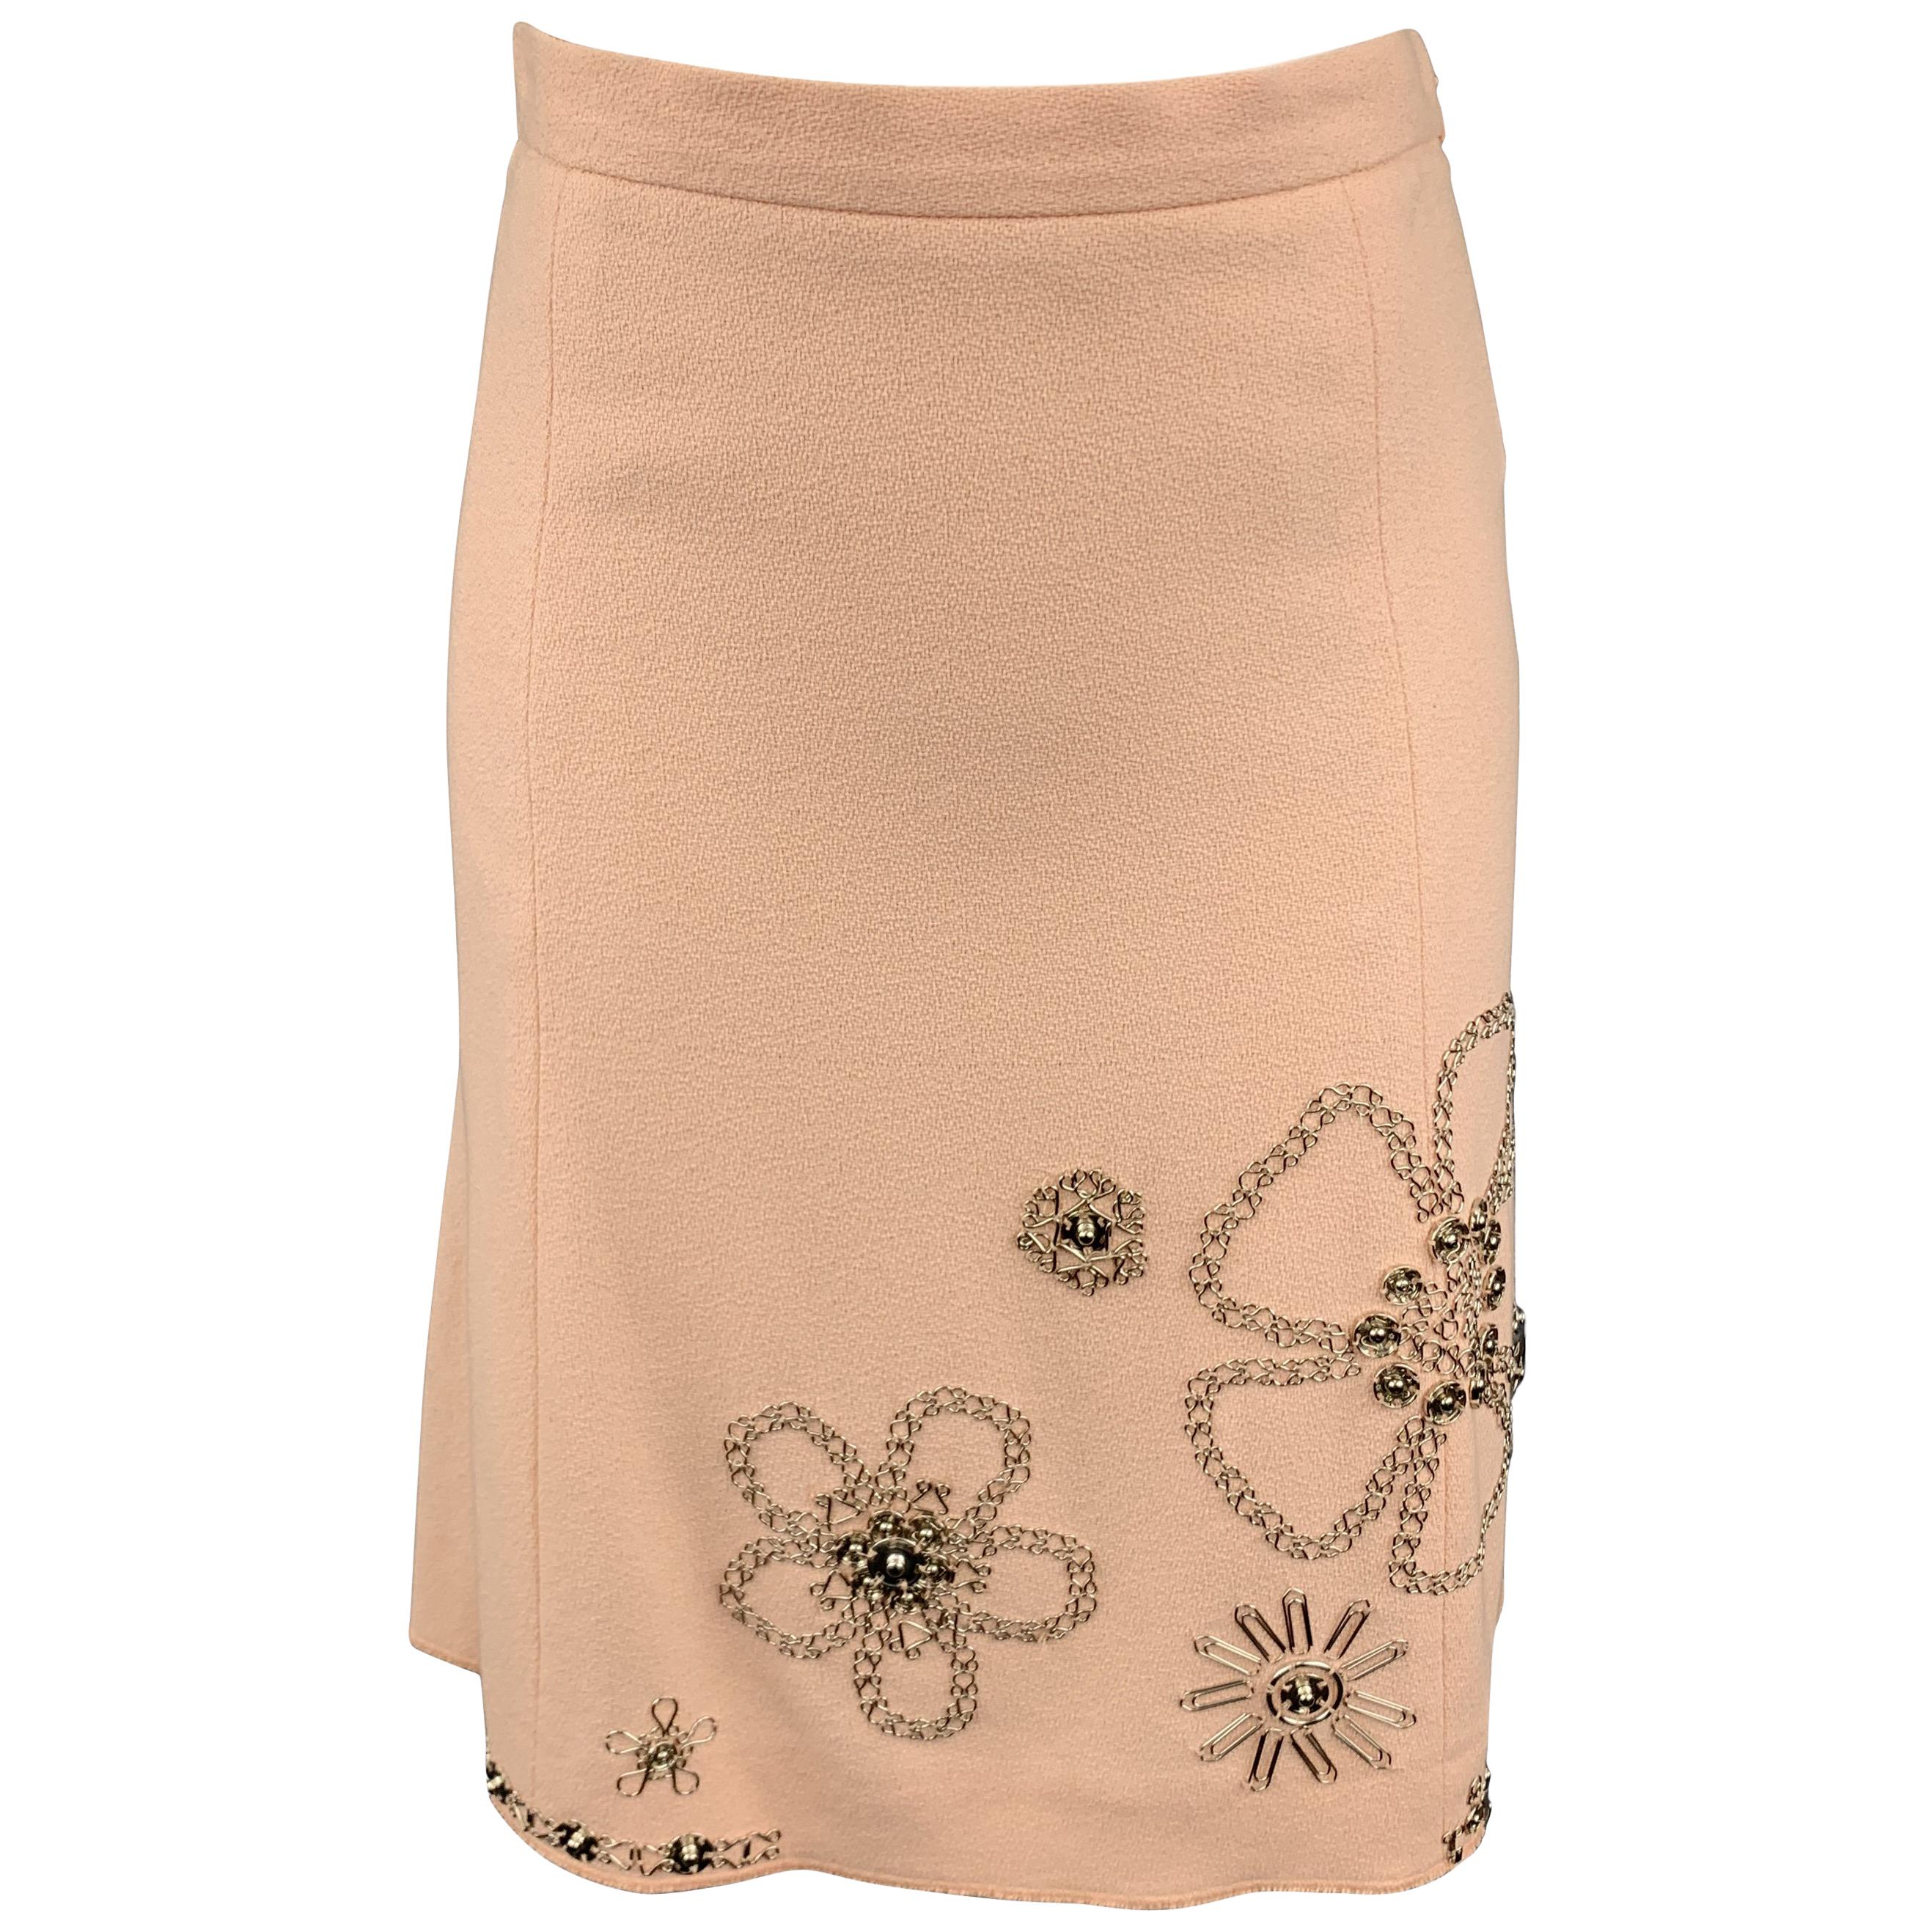 MOSCHINO Size 6 Rose Cotton Floral Embellished Skirt